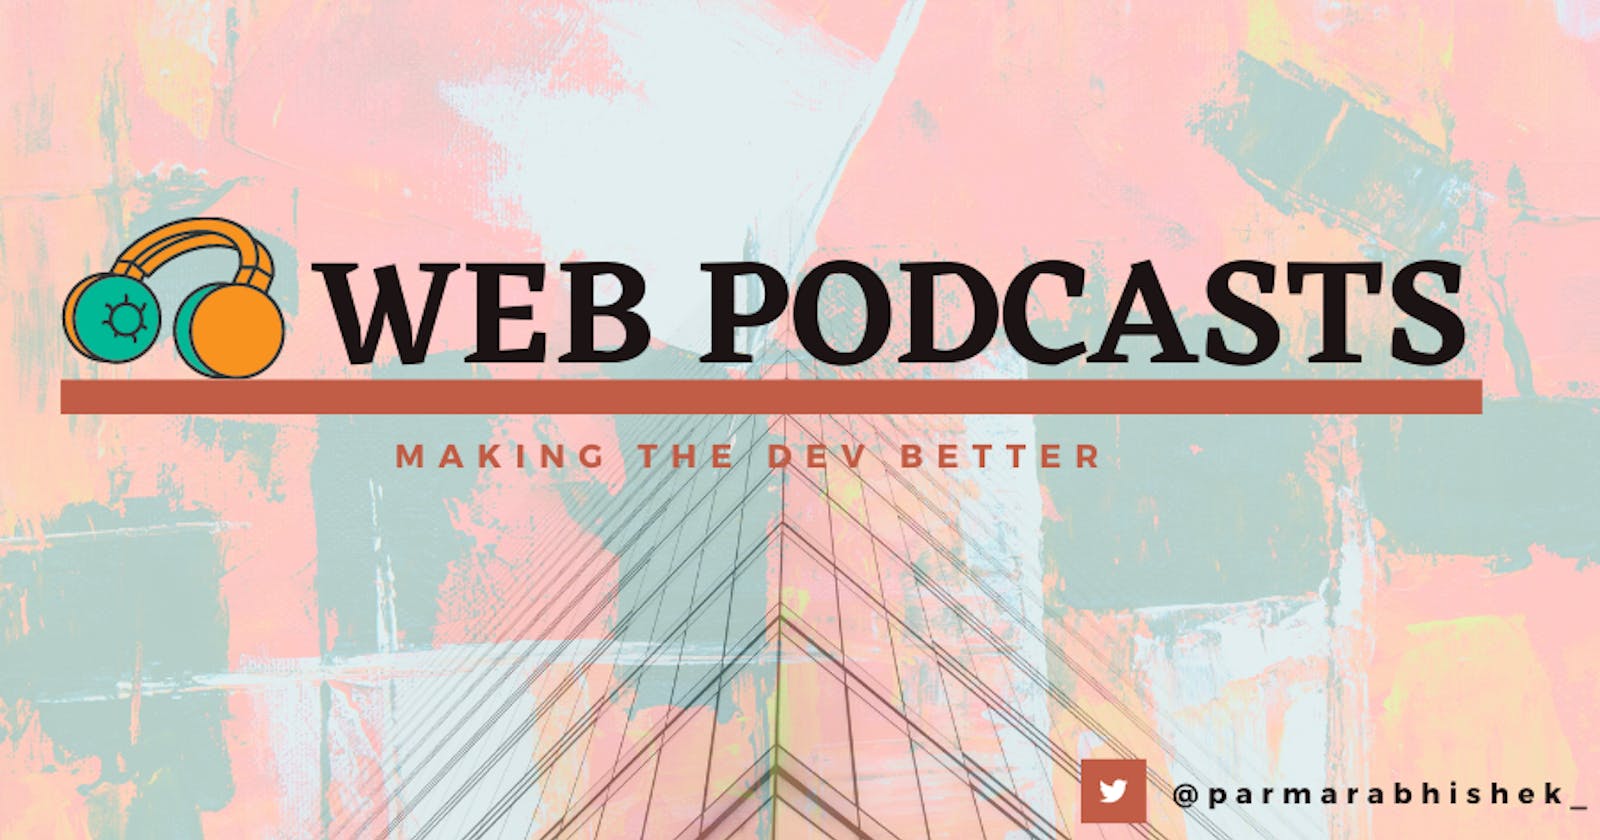 Web Podcasts 2020